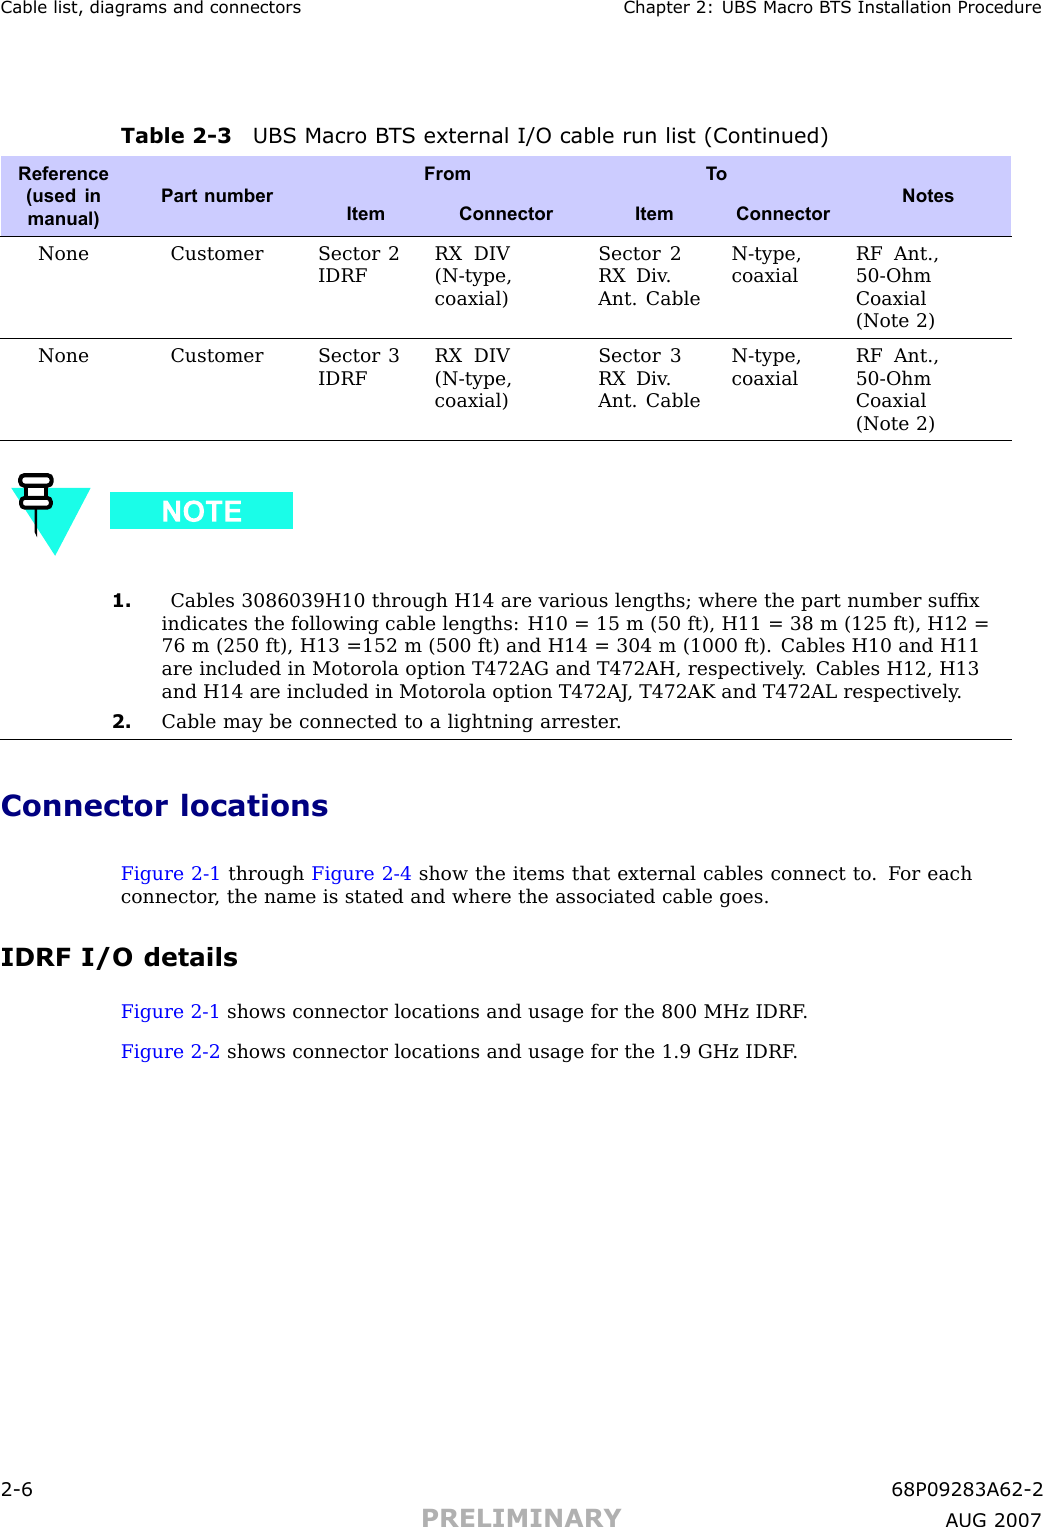 Cable list, diagr ams and connectors Chapter 2: UBS Macro B T S Installation ProcedureTable 2 -3 UBS Macro B T S external I/O cable run list (Continued)From T oReference(used inmanual)Part numberItemConnectorItemConnectorNotesNoneCustomer Sector 2IDRFRX DIV(N-type,coaxial)Sector 2RX Div .Ant. CableN-type,coaxialRF Ant.,50-OhmCoaxial(Note 2)NoneCustomer Sector 3IDRFRX DIV(N-type,coaxial)Sector 3RX Div .Ant. CableN-type,coaxialRF Ant.,50-OhmCoaxial(Note 2)1. Cables 3086039H10 through H14 are various lengths; where the part number sufﬁxindicates the following cable lengths: H10 = 15 m (50 ft), H11 = 38 m (125 ft), H12 =76 m (250 ft), H13 =152 m (500 ft) and H14 = 304 m (1000 ft). Cables H10 and H11are included in Motorola option T472AG and T472AH, respectively . Cables H12, H13and H14 are included in Motorola option T472AJ , T472AK and T472AL respectively .2. Cable may be connected to a lightning arrester .Connector locationsFigure 2 -1 through Figure 2 -4 show the items that external cables connect to . F or eachconnector , the name is stated and where the associated cable goes.IDRF I/O detailsFigure 2 -1 shows connector locations and usage for the 800 MHz IDRF .Figure 2 -2 shows connector locations and usage for the 1.9 GHz IDRF .2 -6 68P09283A62 -2PRELIMINARY A UG 2007